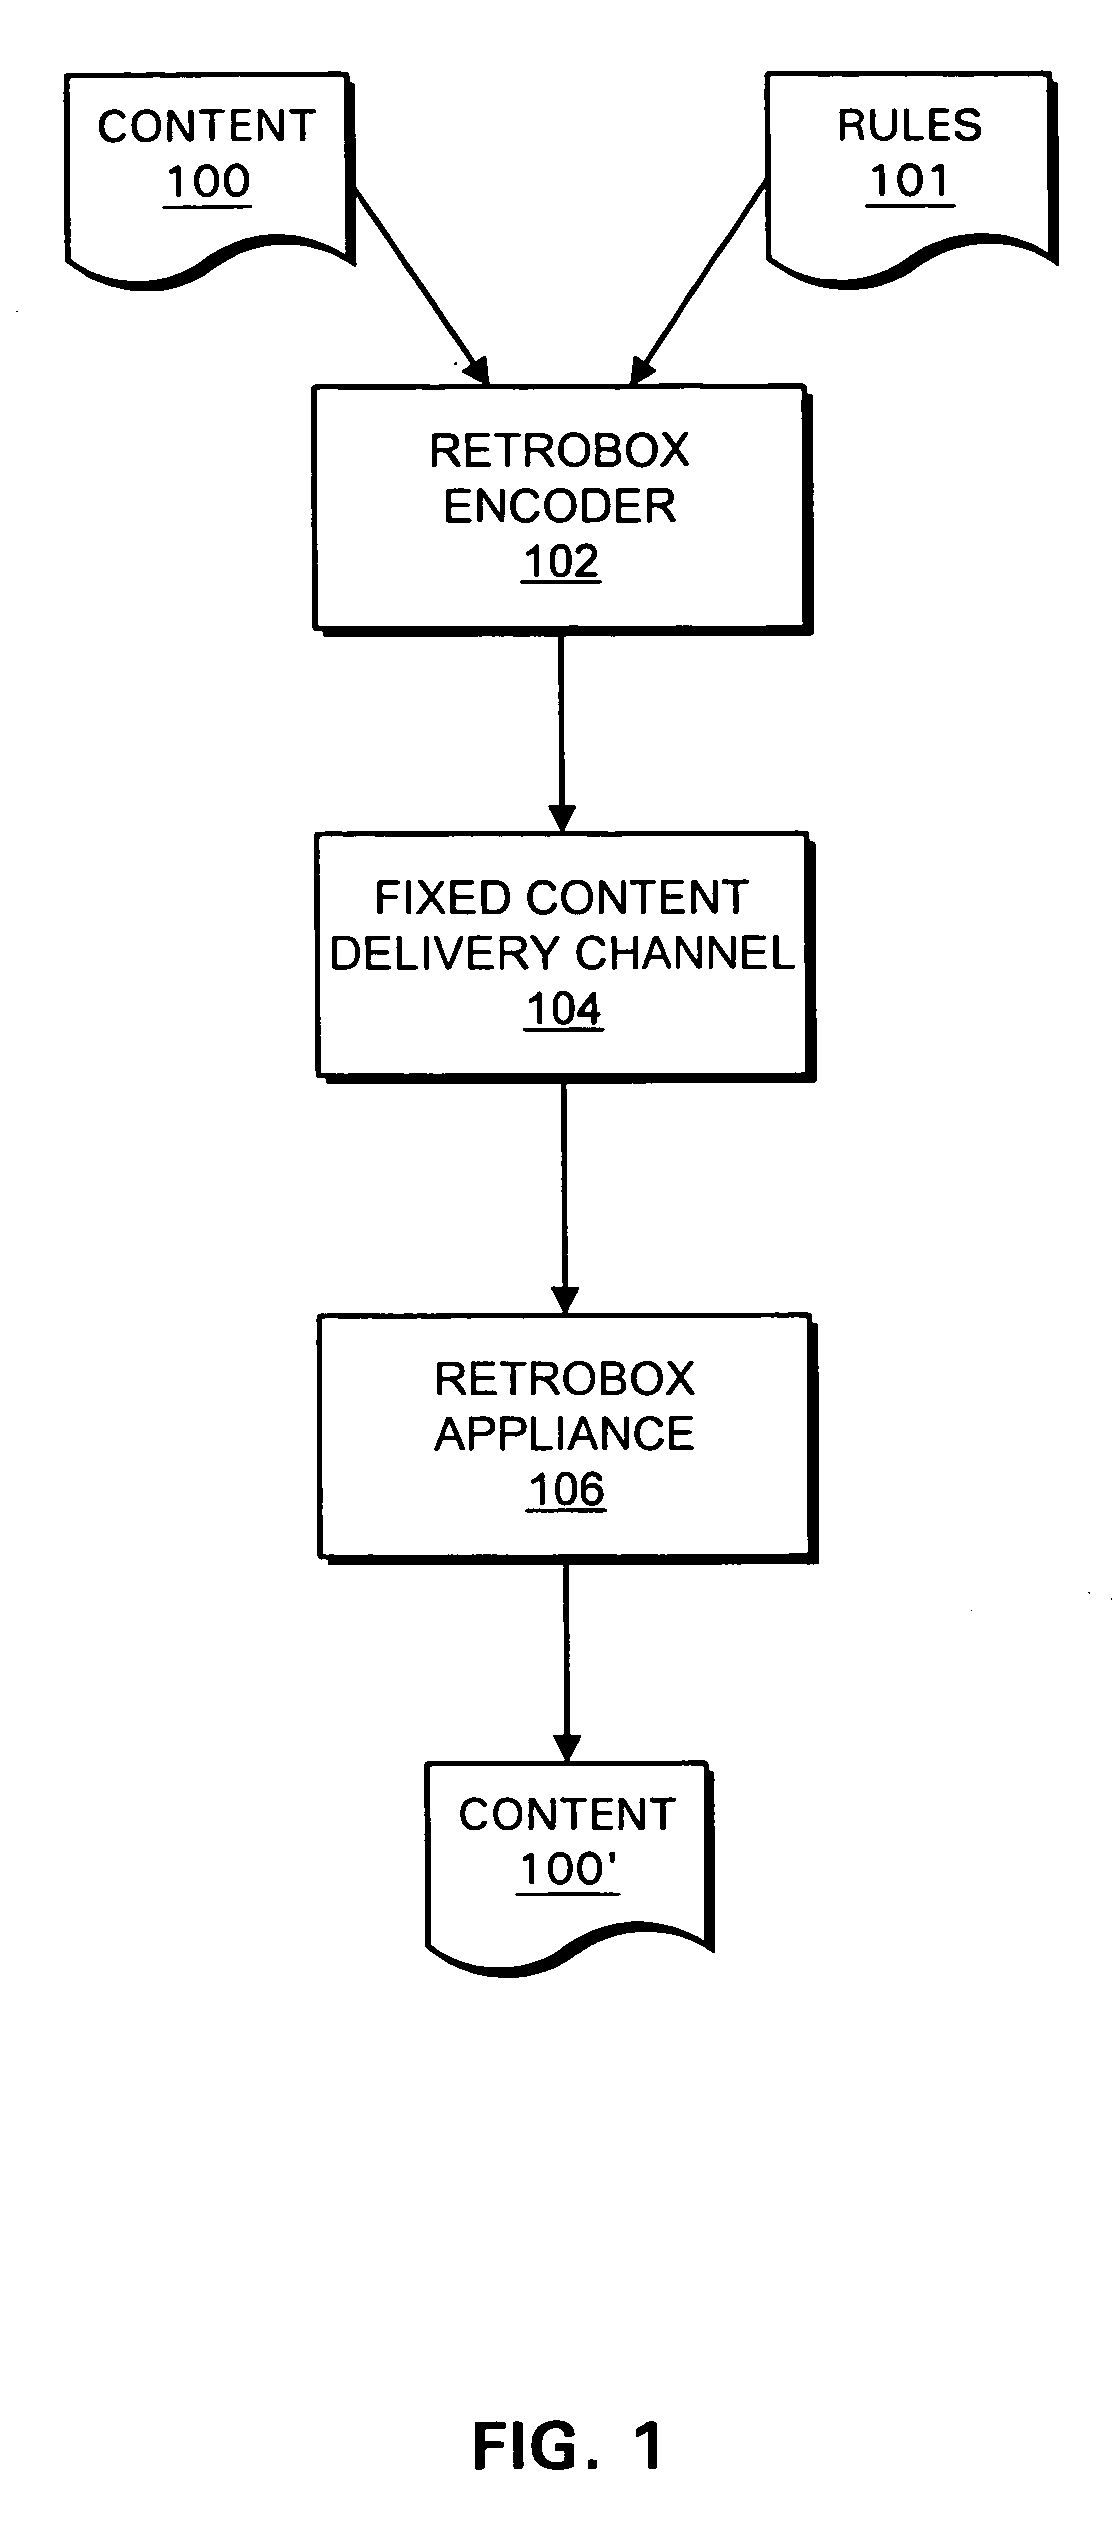 Systems and methods for retrofitting electronic appliances to accept different content formats